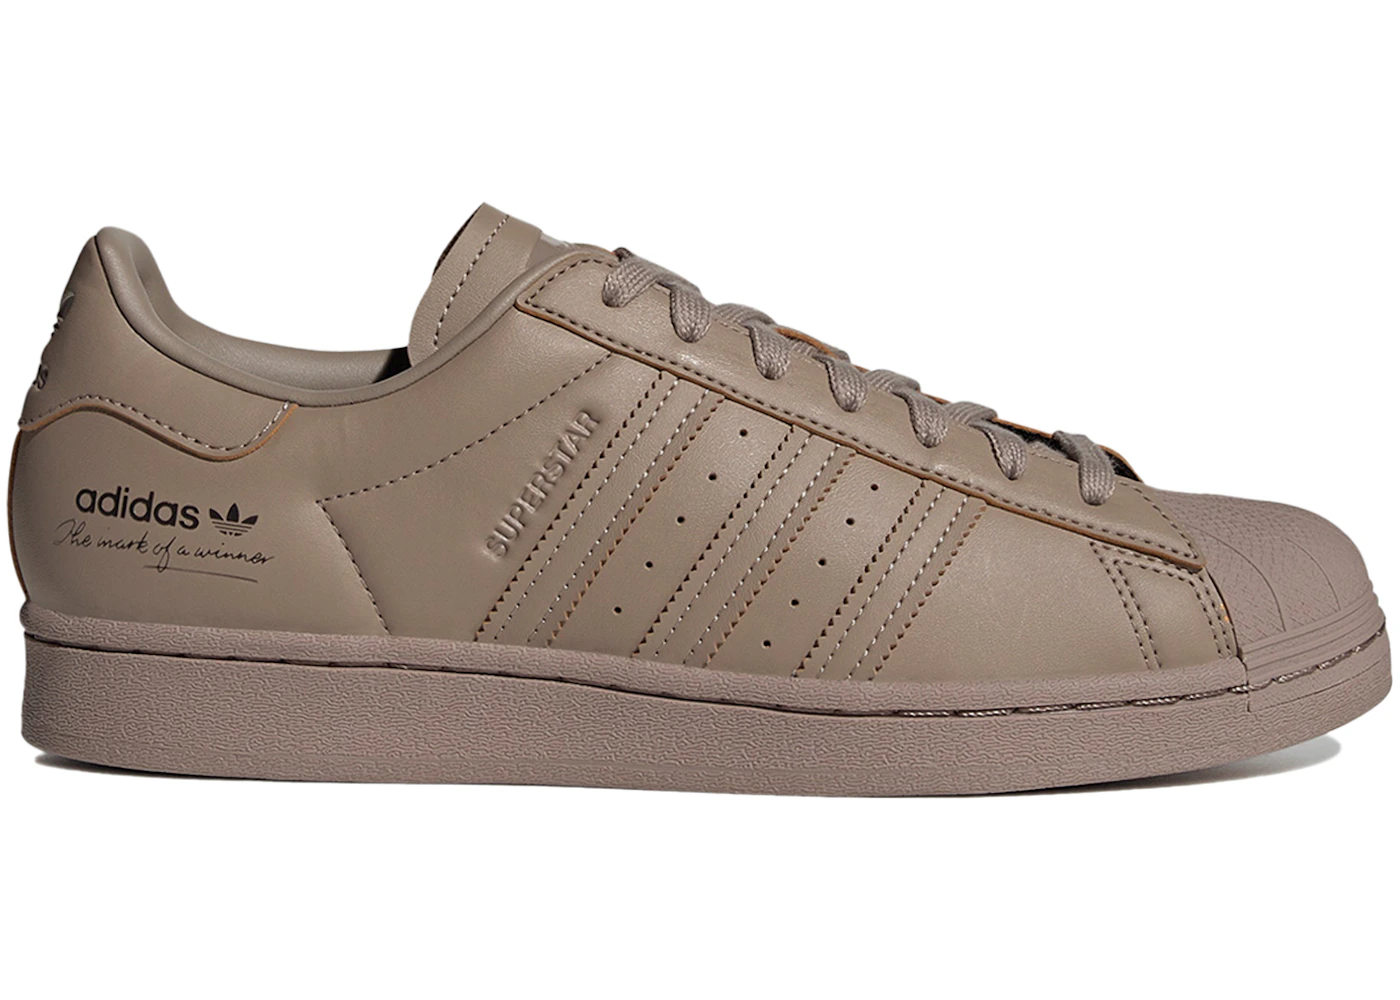 adidas Superstar The Mark of a Winner Chalky Brown Men's - GY9641 - US